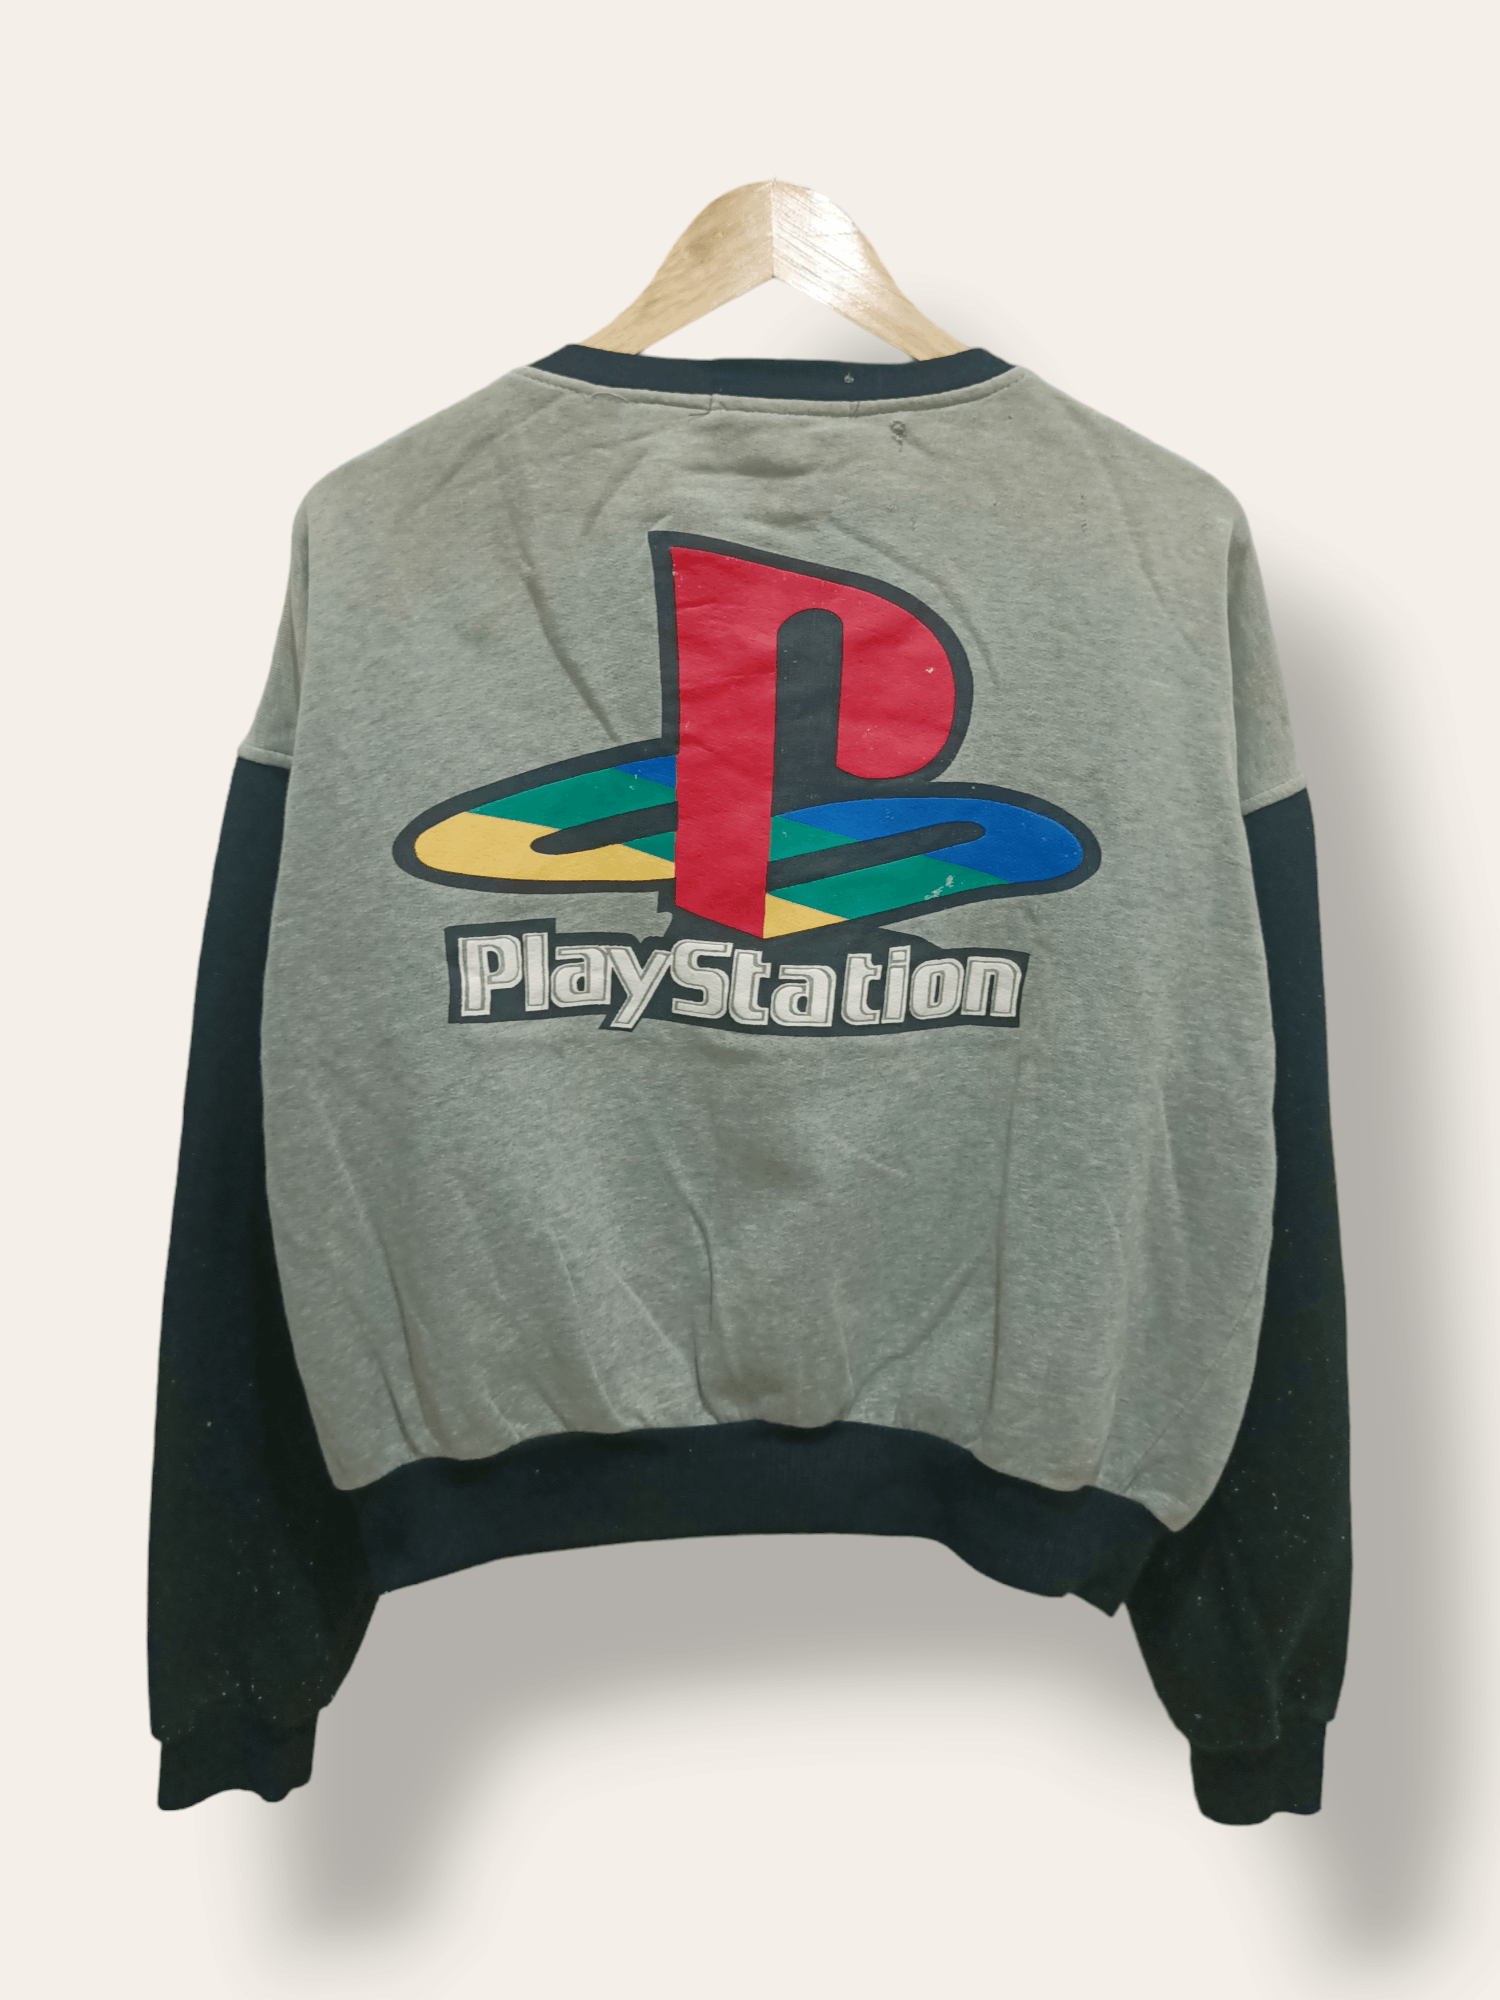 Rare Vintage Playstation Motorsports Collection Sweater - 1